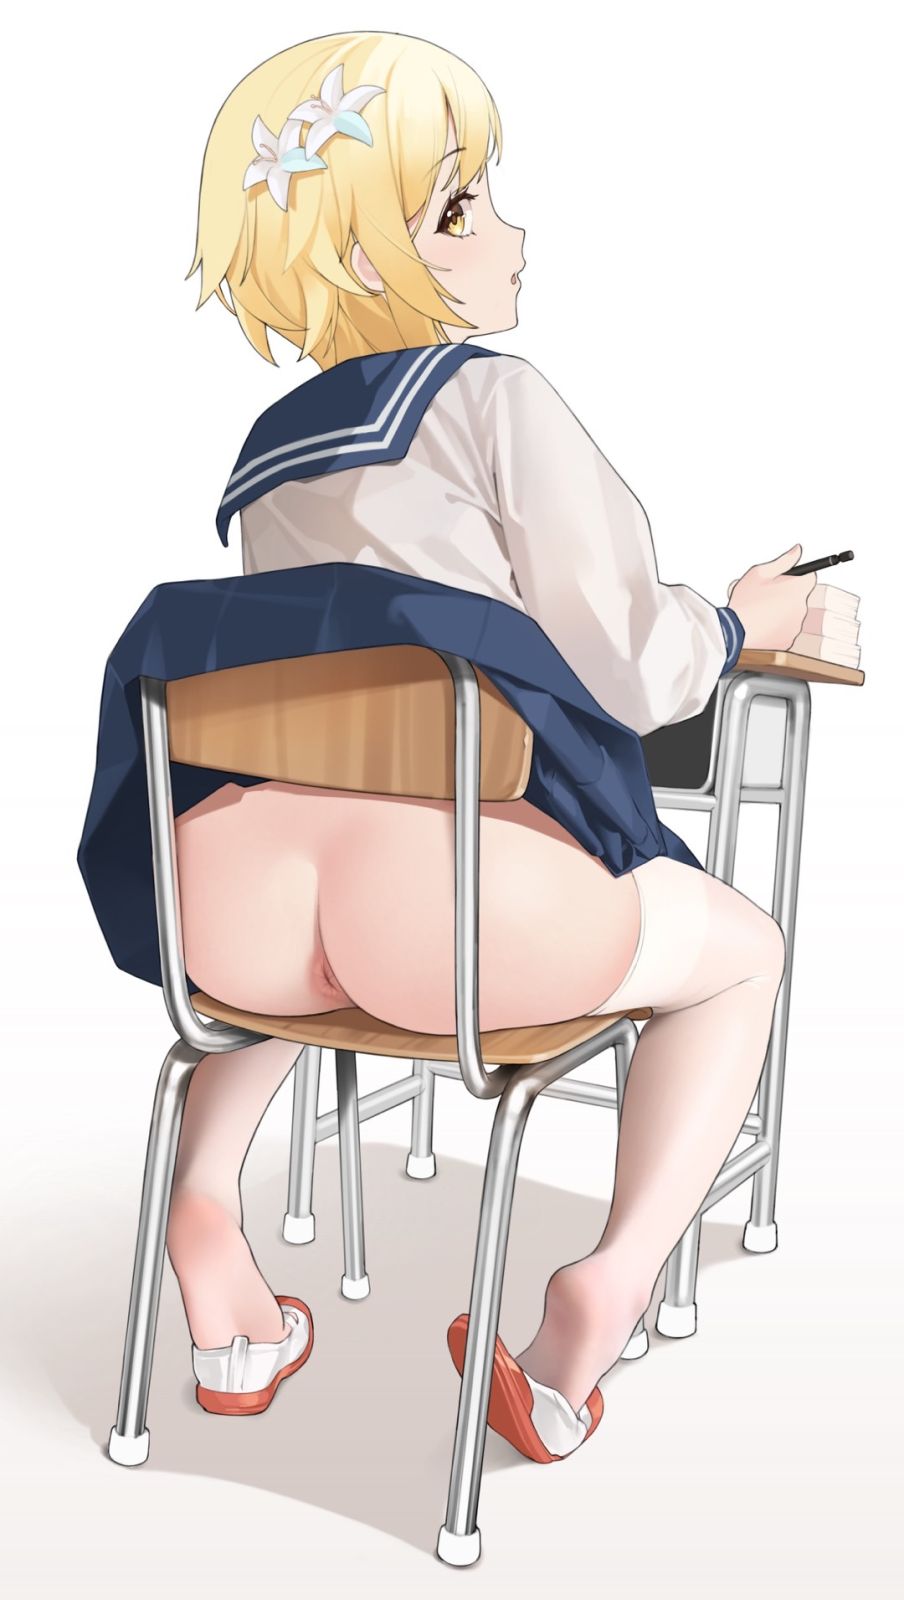 good-view-during-the-lesson.jpg